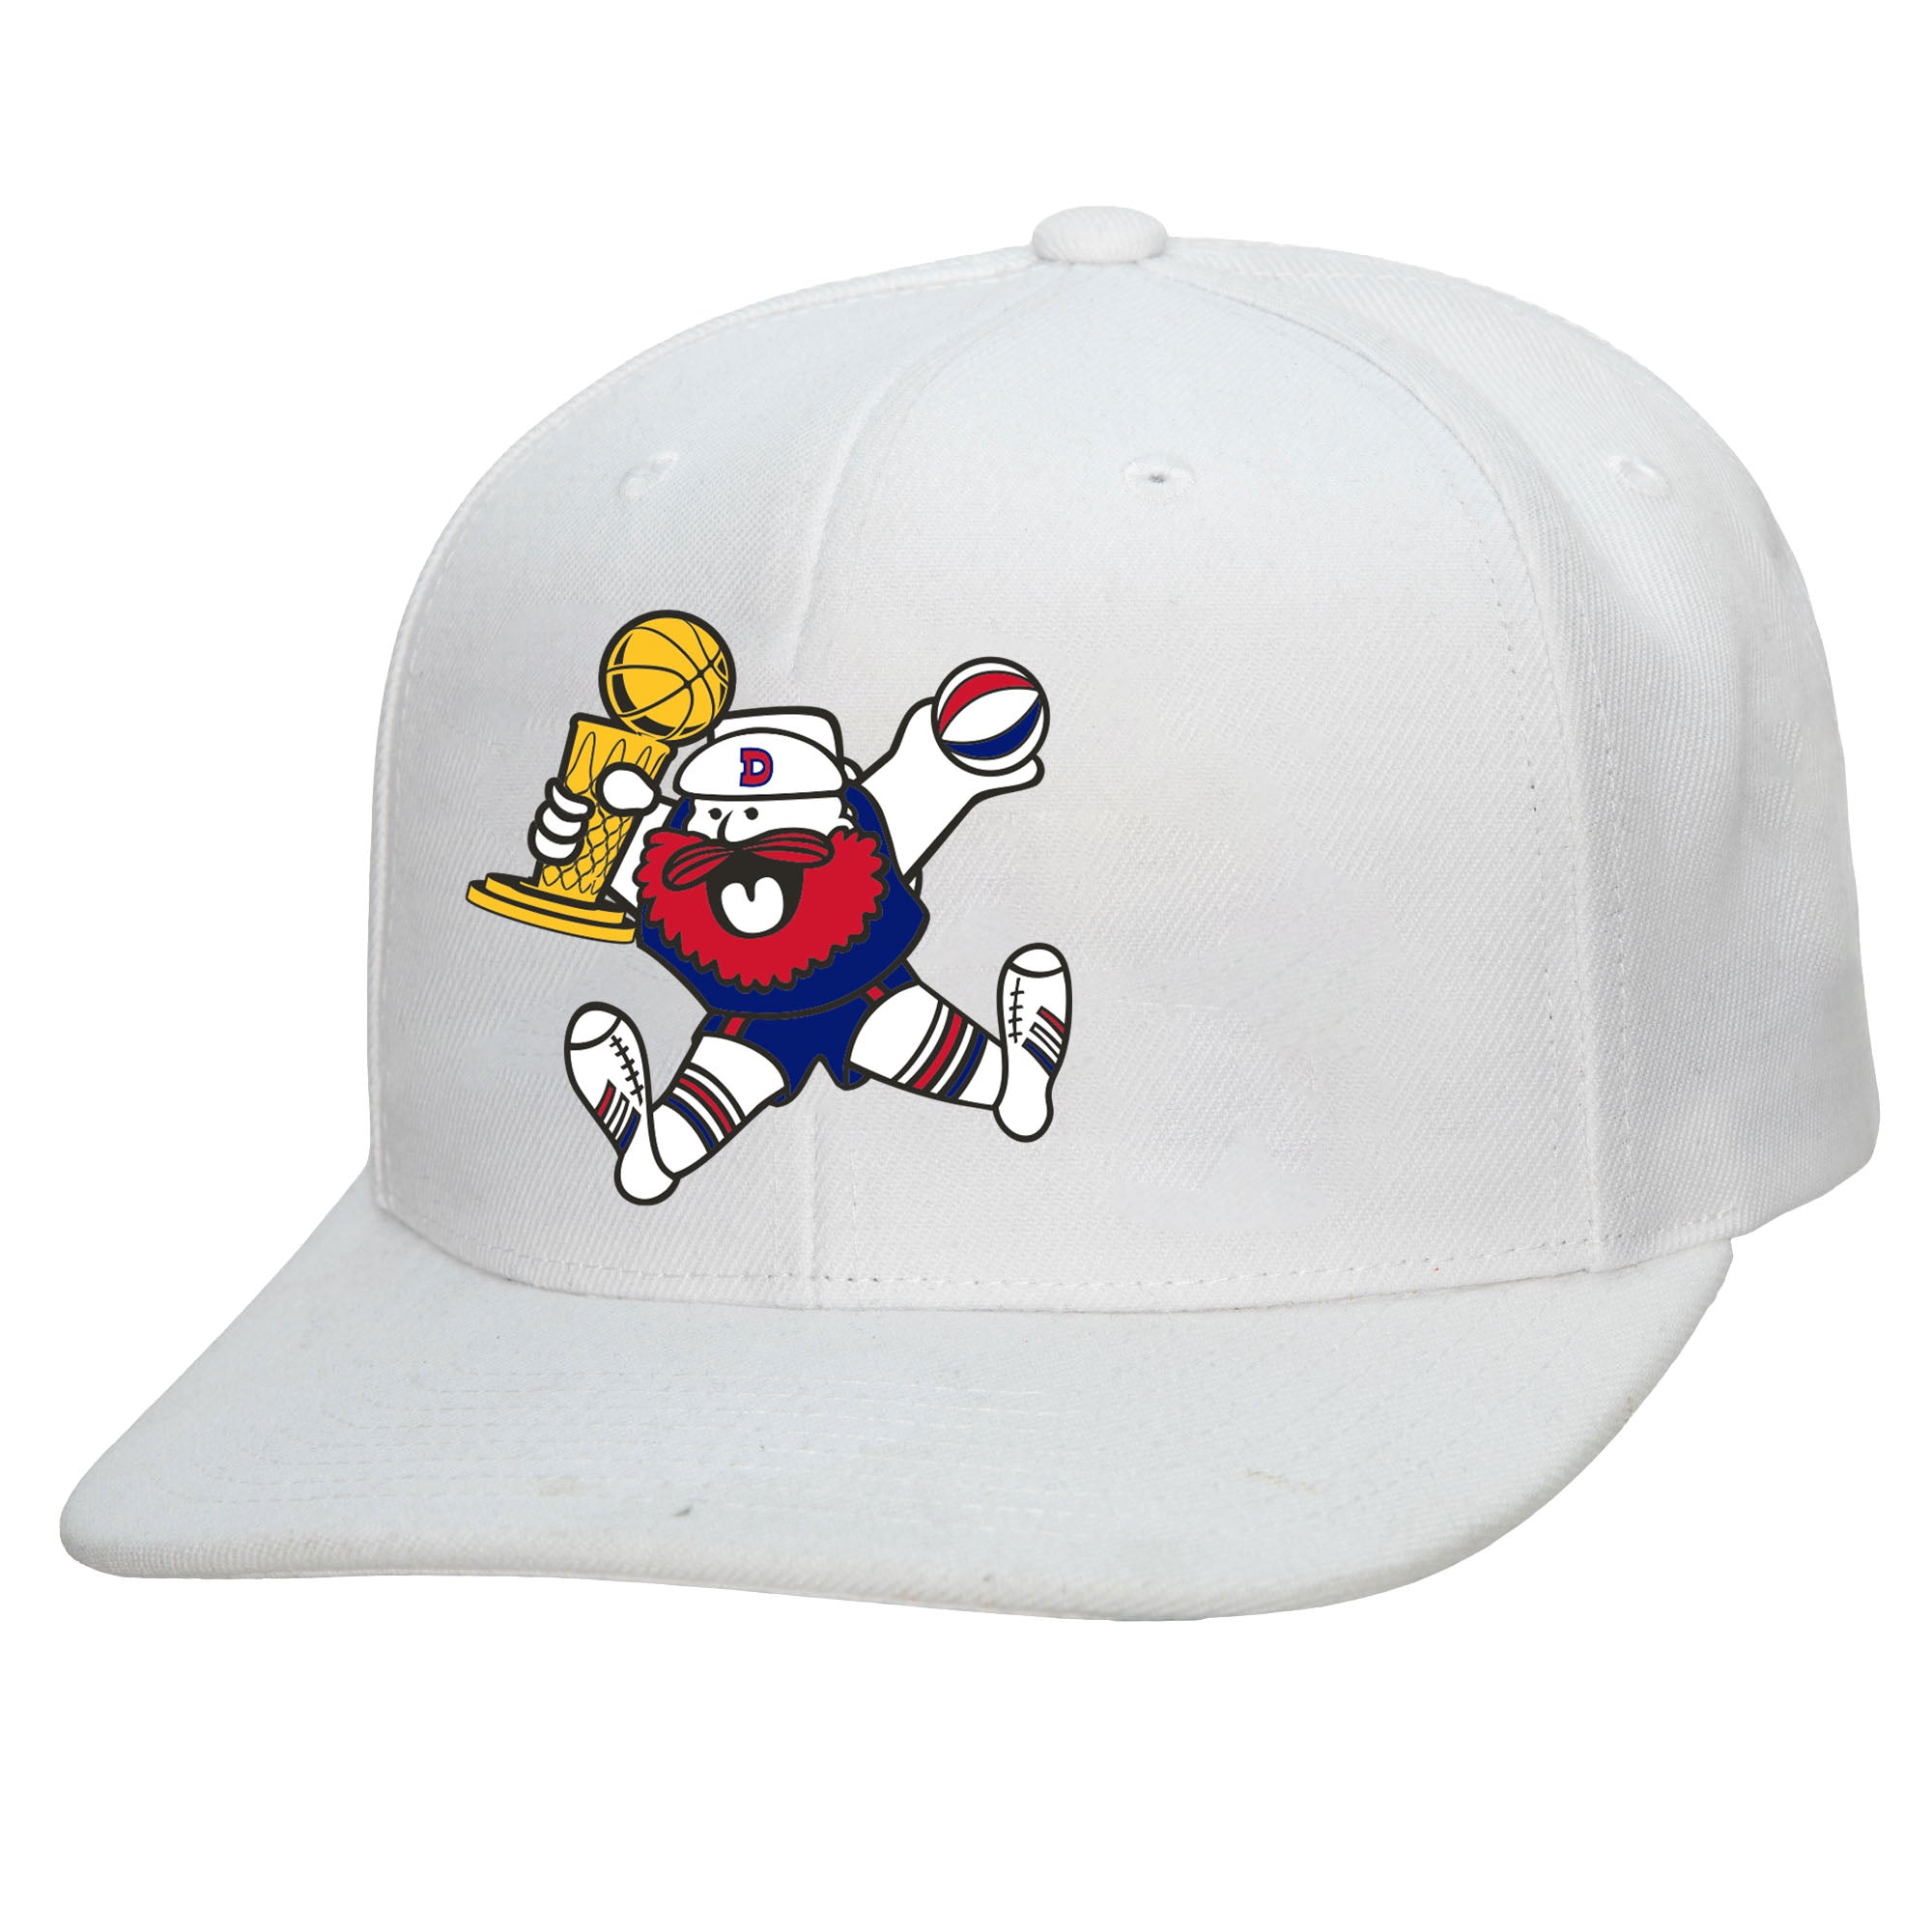 Mitchell & Ness Denver Nuggets SnapBack hat navy red hat